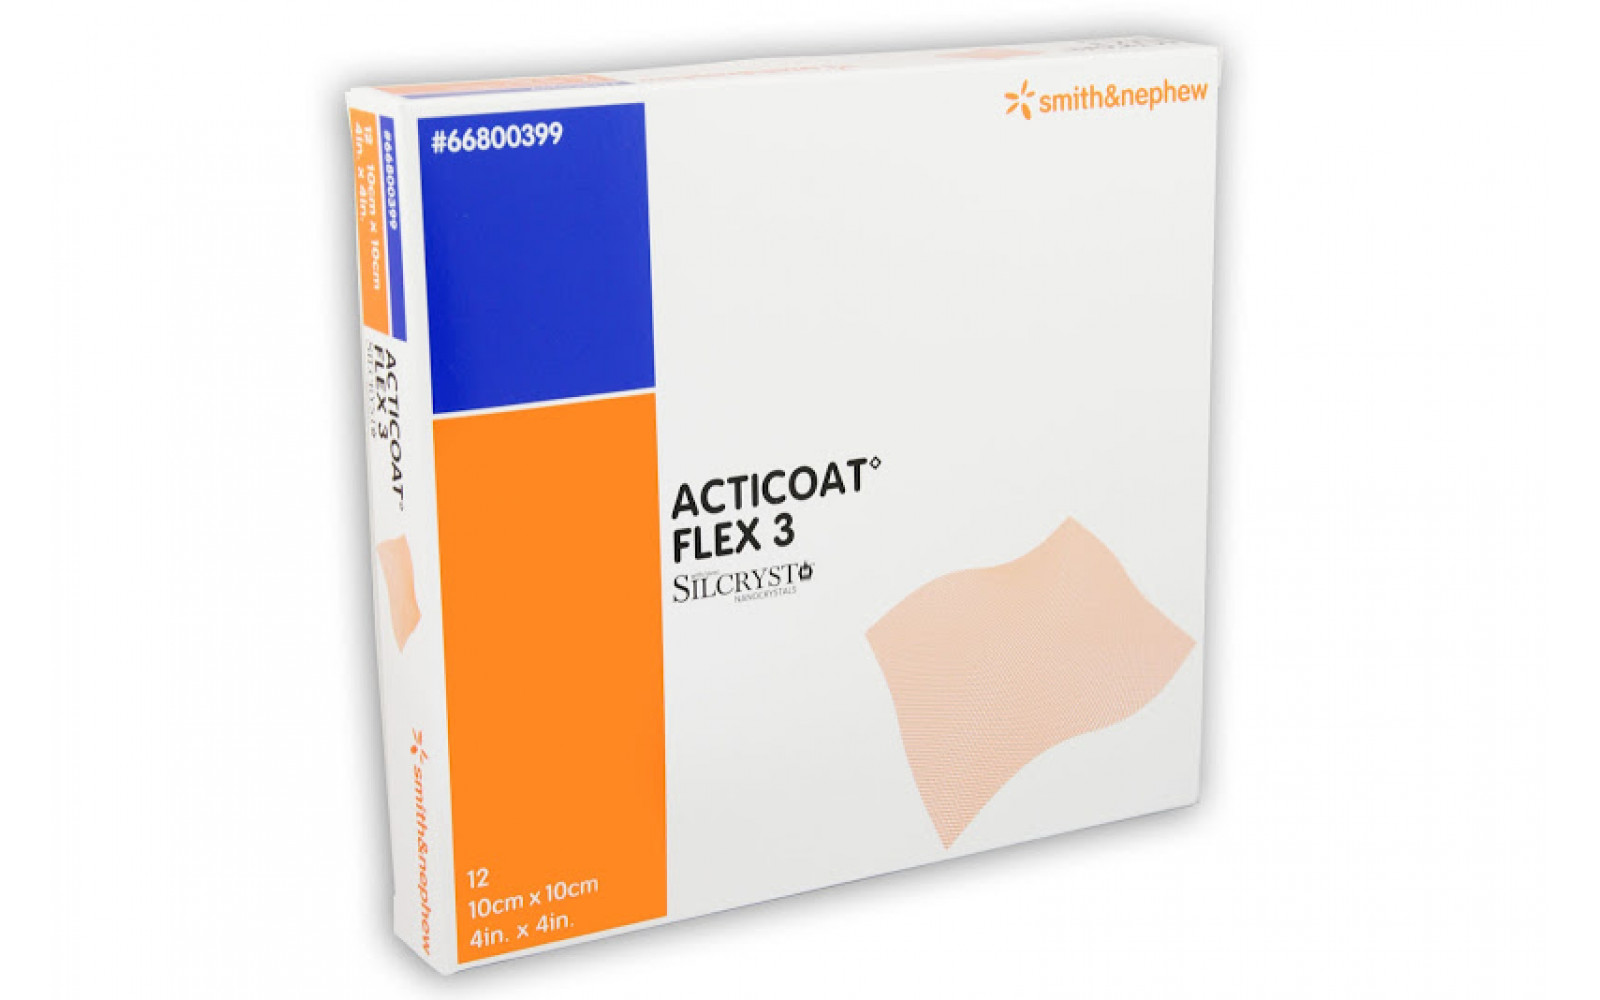 ACTICOAT Flex 3 Antimicrobial Barrier Dressing (Smith+Nephew)